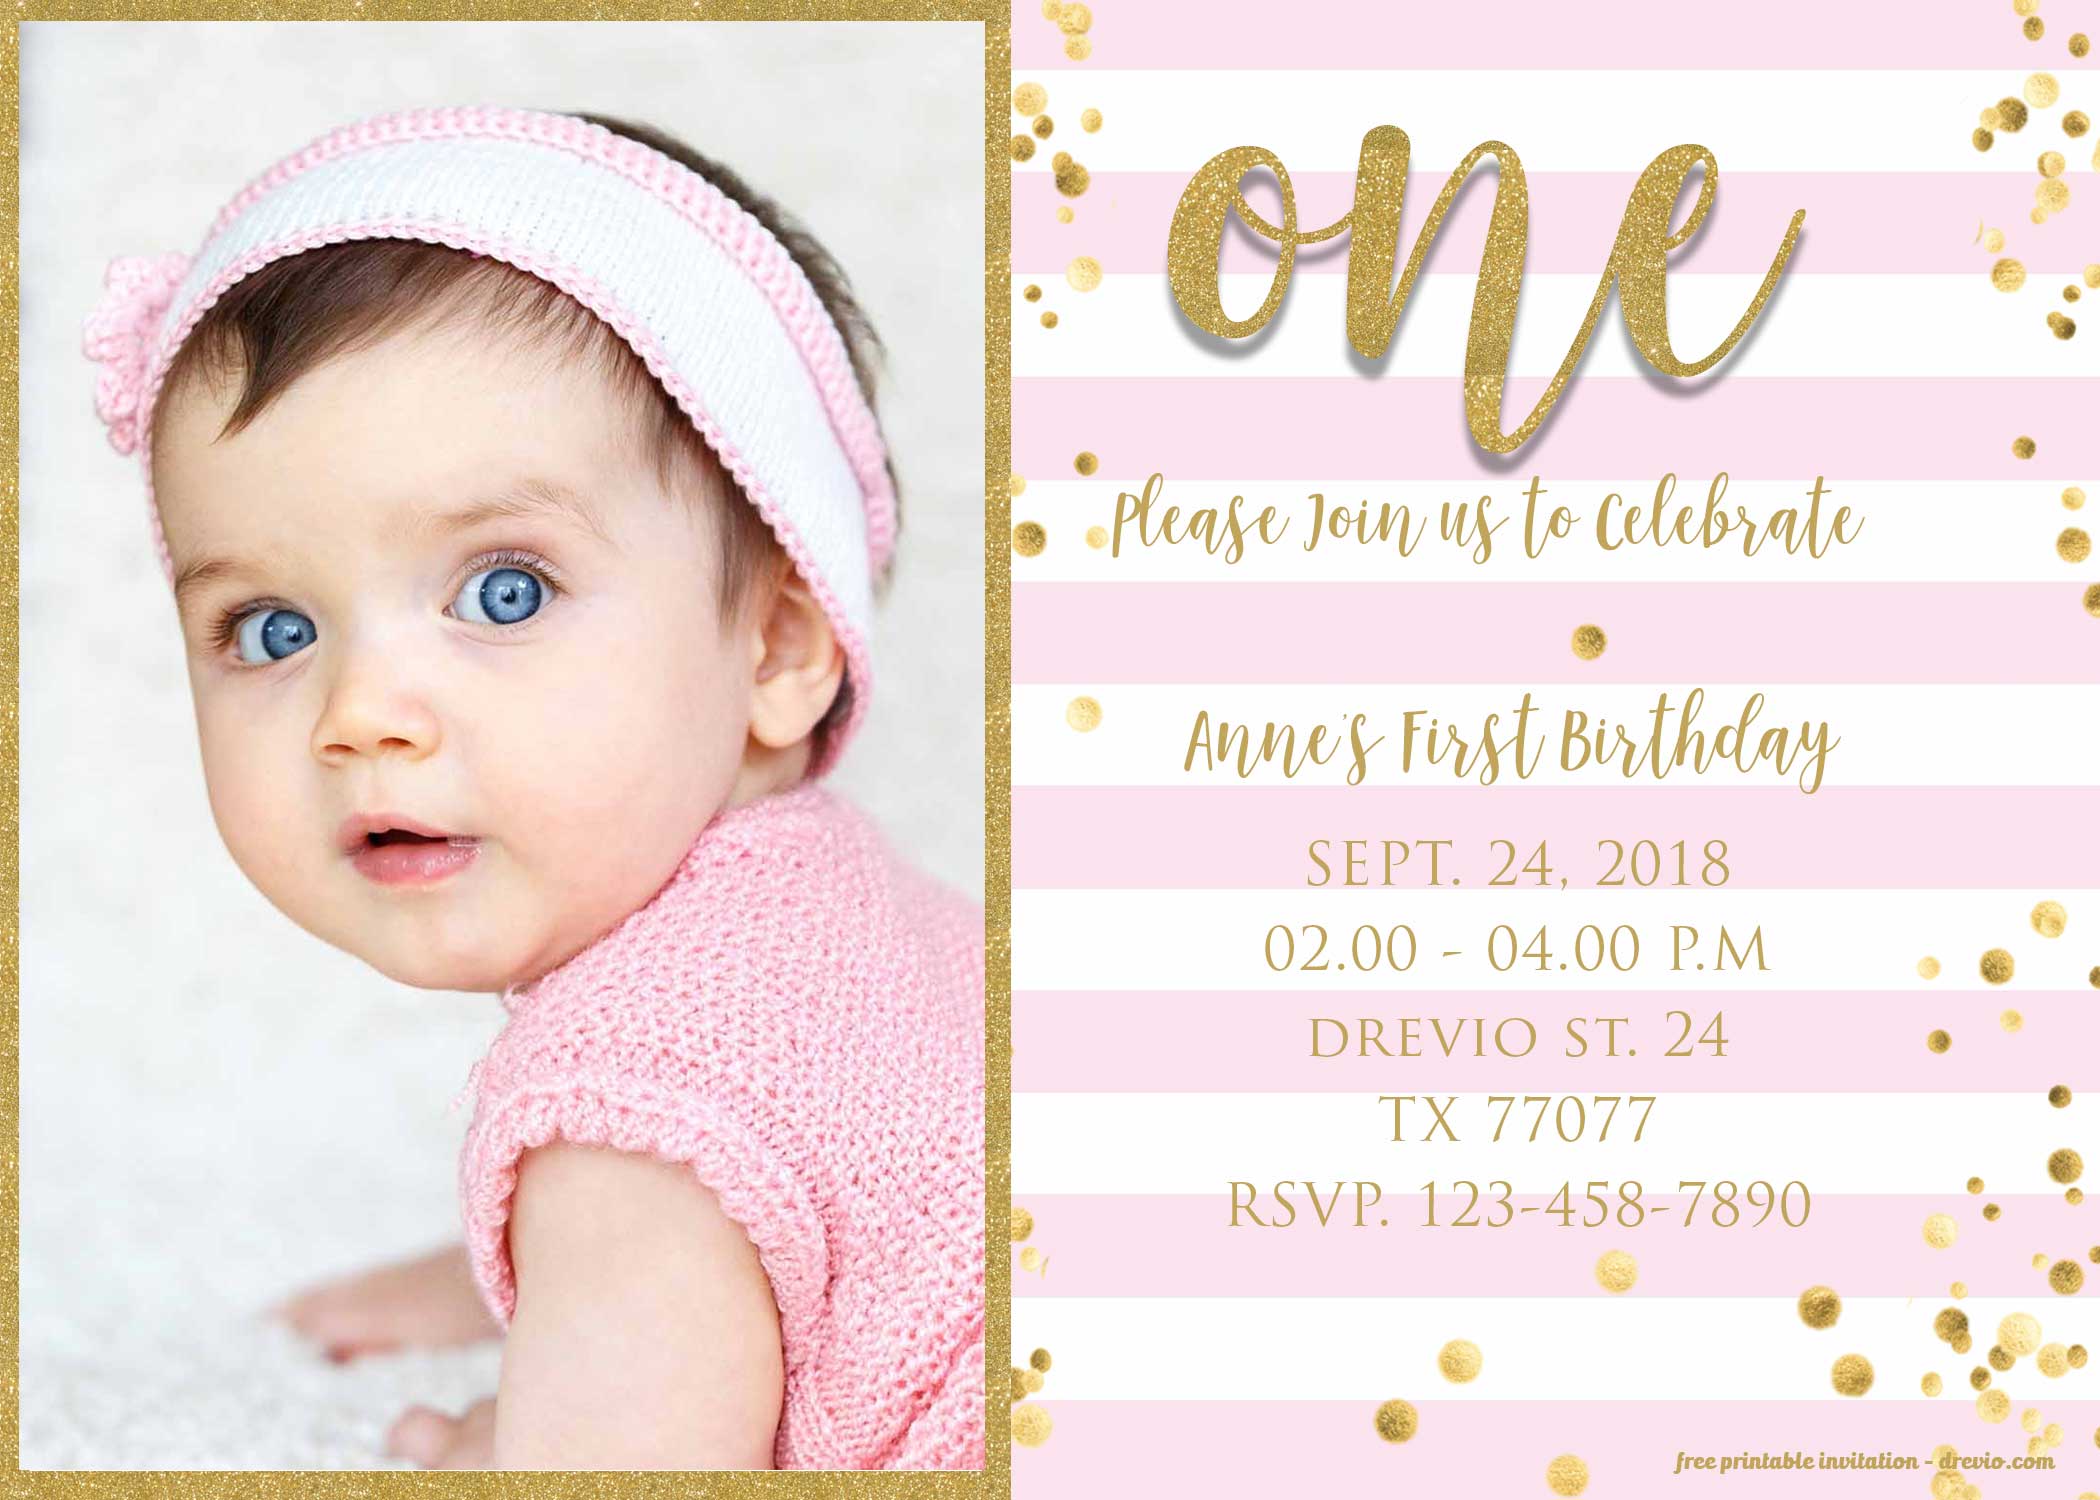 free-first-birthday-invitation-cards-templates-printable-templates-free